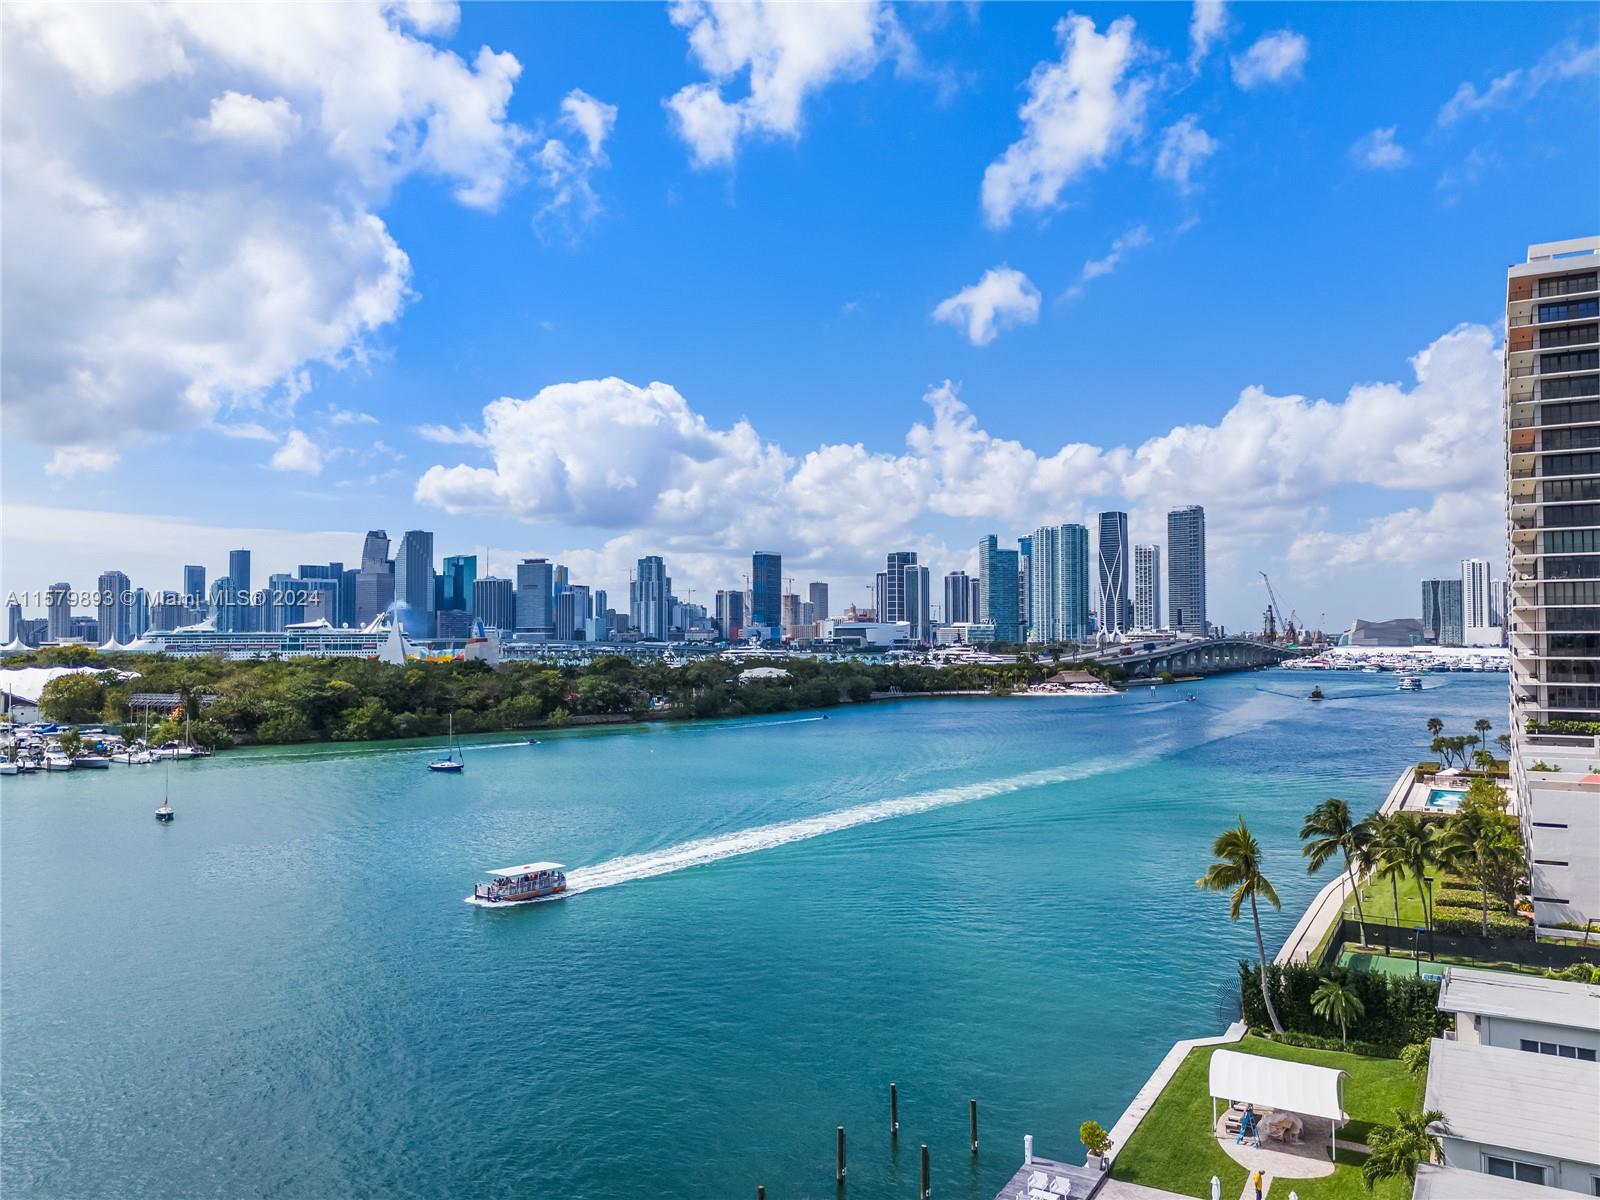 Own a piece of The Venetian Islands; Miami's most centric location in between Miami/Biscayne Blvd. & Miami Beach, surrounded only by water and million dollar homes. Assigned Paddle-board/Kayak storage available. Not even the million dollar homes have these city views! Watch the cruise ships, Jet Skis and the party boats pass by from your balcony porch or enjoy the salt water heated pool all year round. Bathroom, Impact windows are brand new. Newly Installed Impact Windows. Storage Unit included on the ground floor.